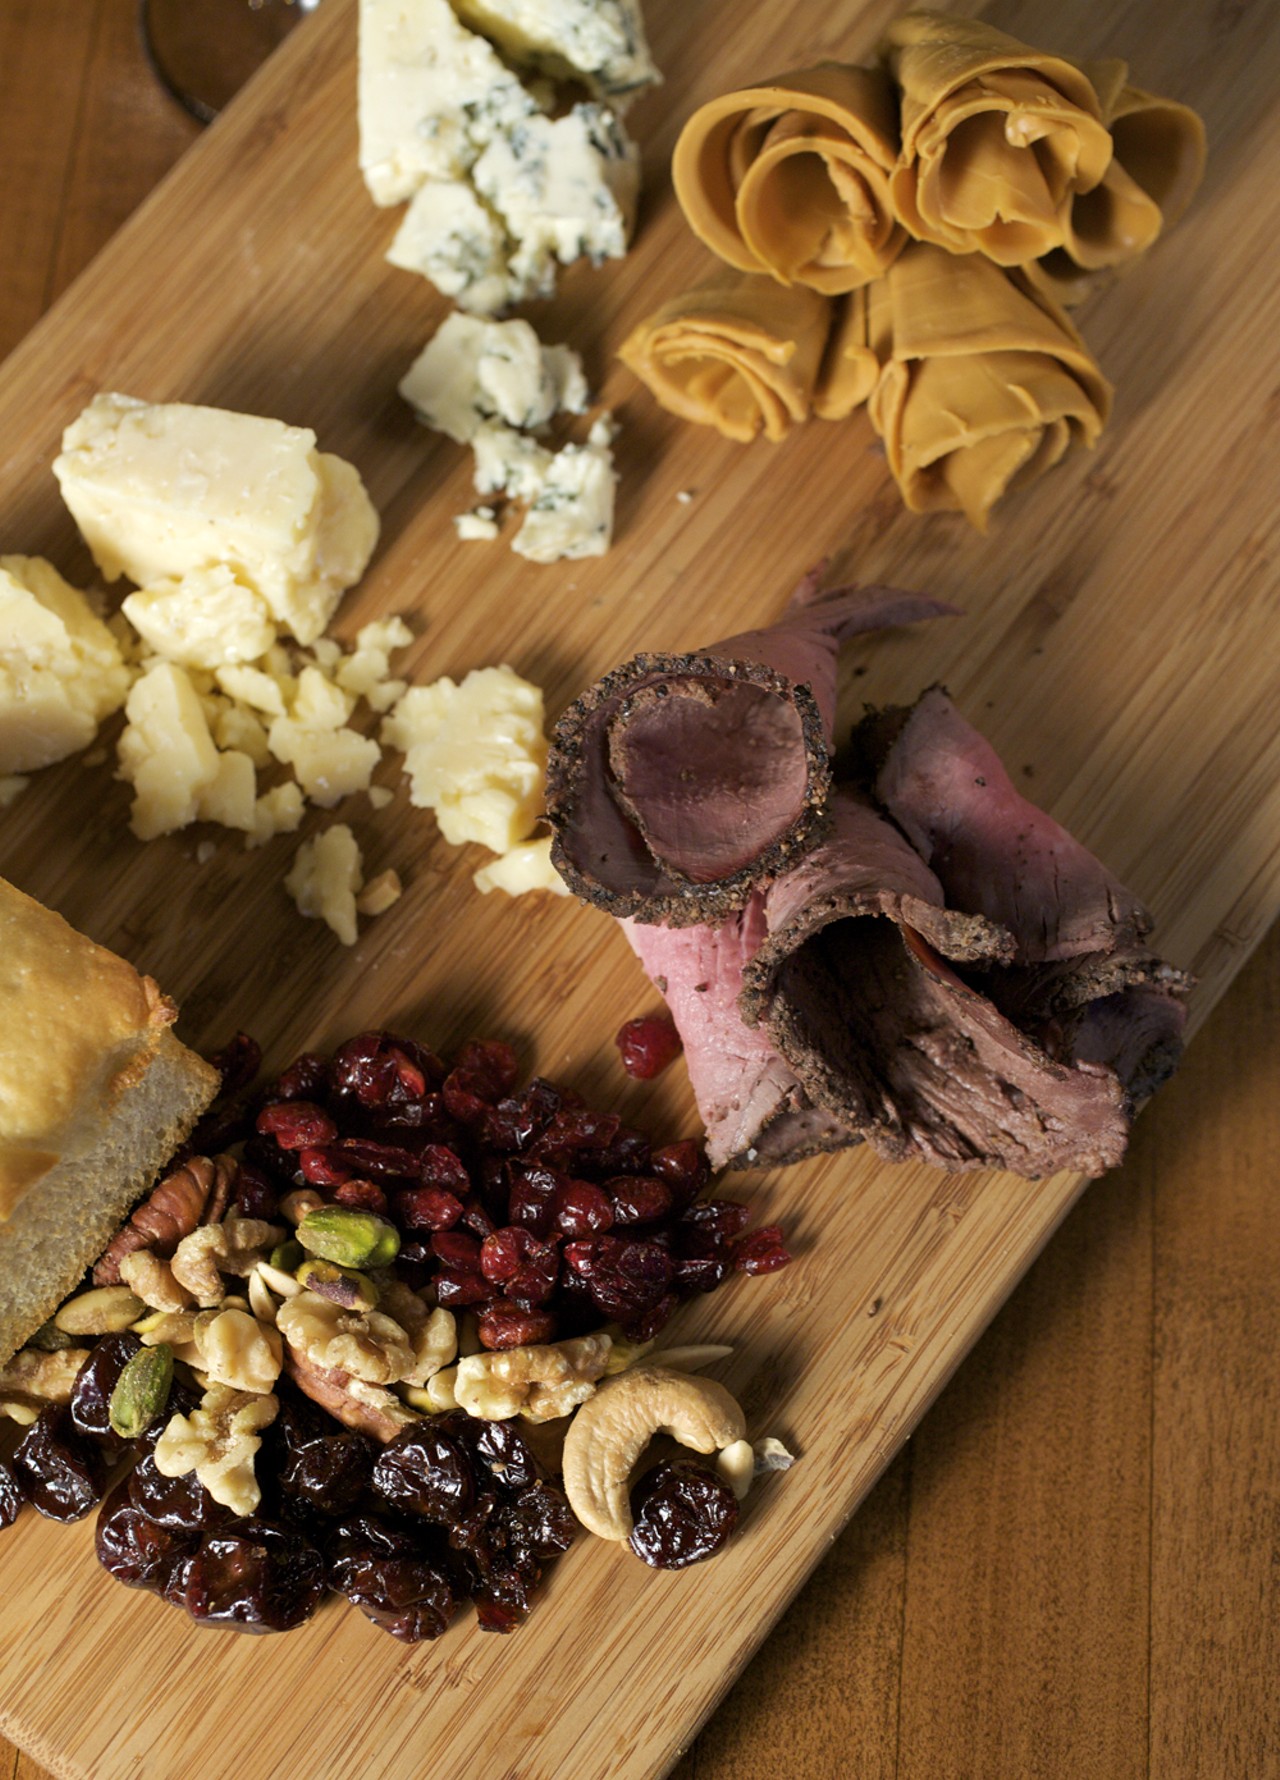 One page of the menu is a four-column chart where you select, a la carte, a cheese and charcuterie plate. Shown here is a richly nutty and sweet Norwegian cheese (on top right), Gjetost. Then, going clockwise, is a dry rubbed smoked NY strip, dried fruits and nuts that accompany every a la carte cheese and charcuterie plate along with the bread. Then there is the Jasper Hill Cellar Aged, which is a Vermont, buttery cheese with a clean, tangy finish. And last, a Rogue Creamery Smoky Blue from Oregon. It has a hint of smoke, which gives way to sweet and salty.